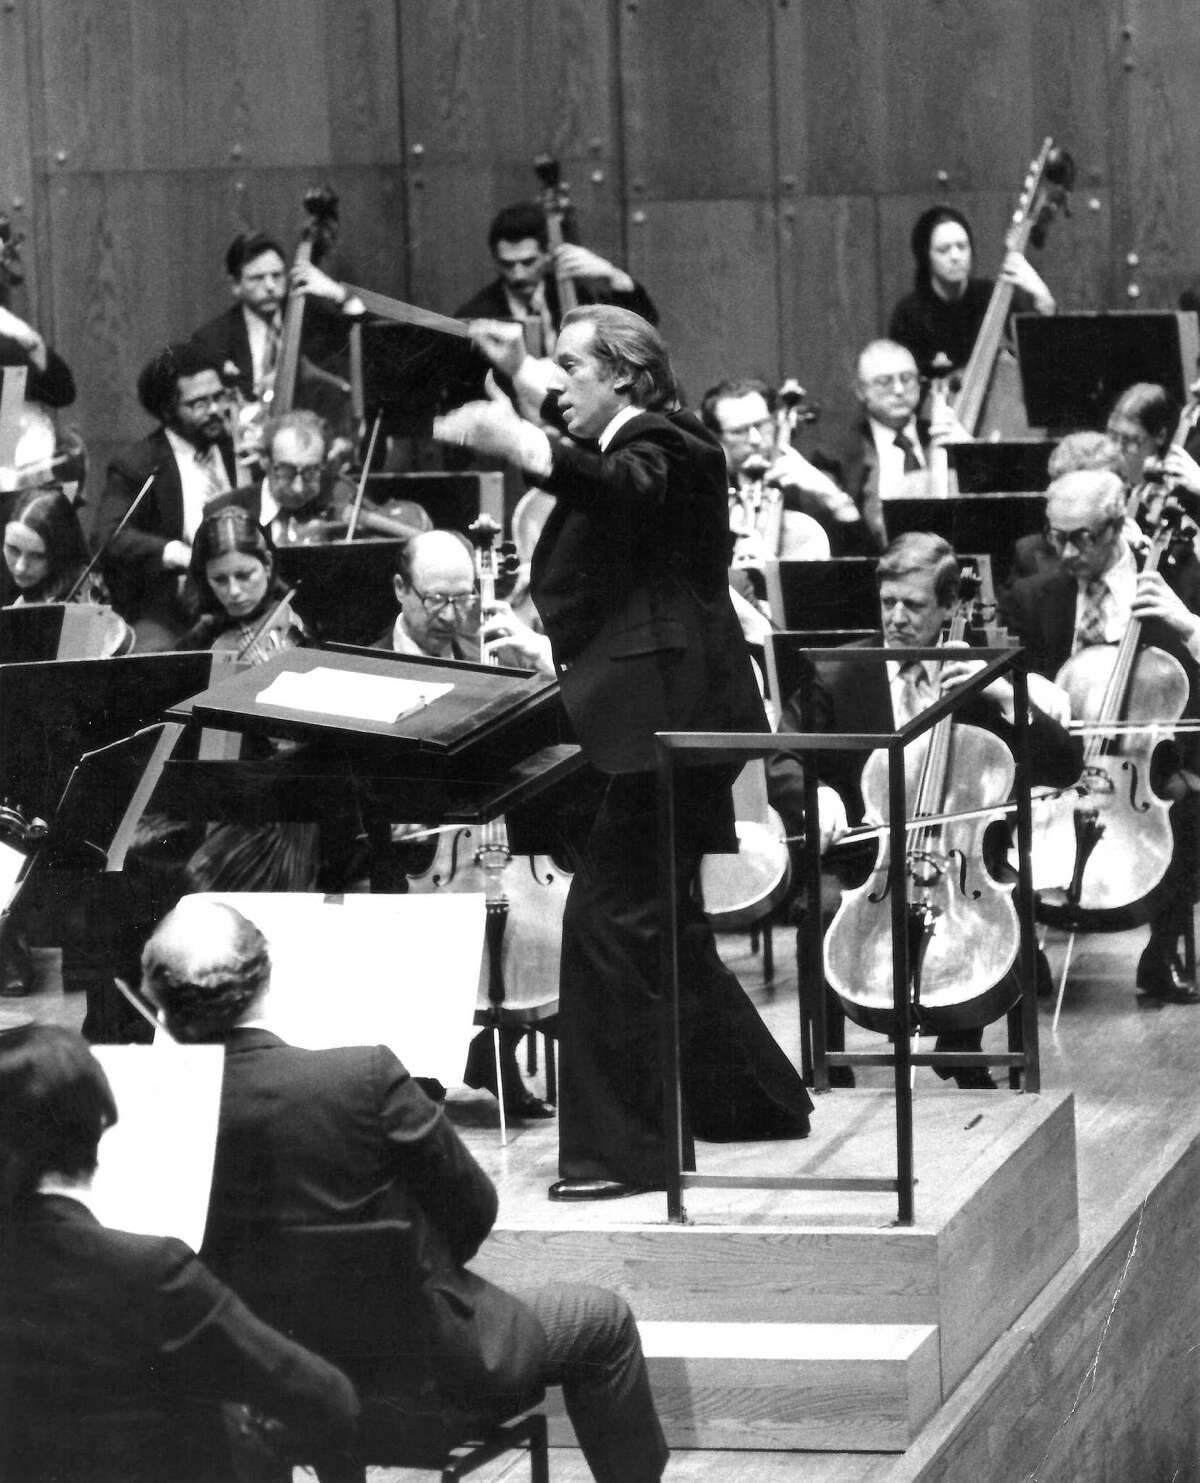 David Gilbert conducts the New York Philharmonic in concert in the early 1970s.